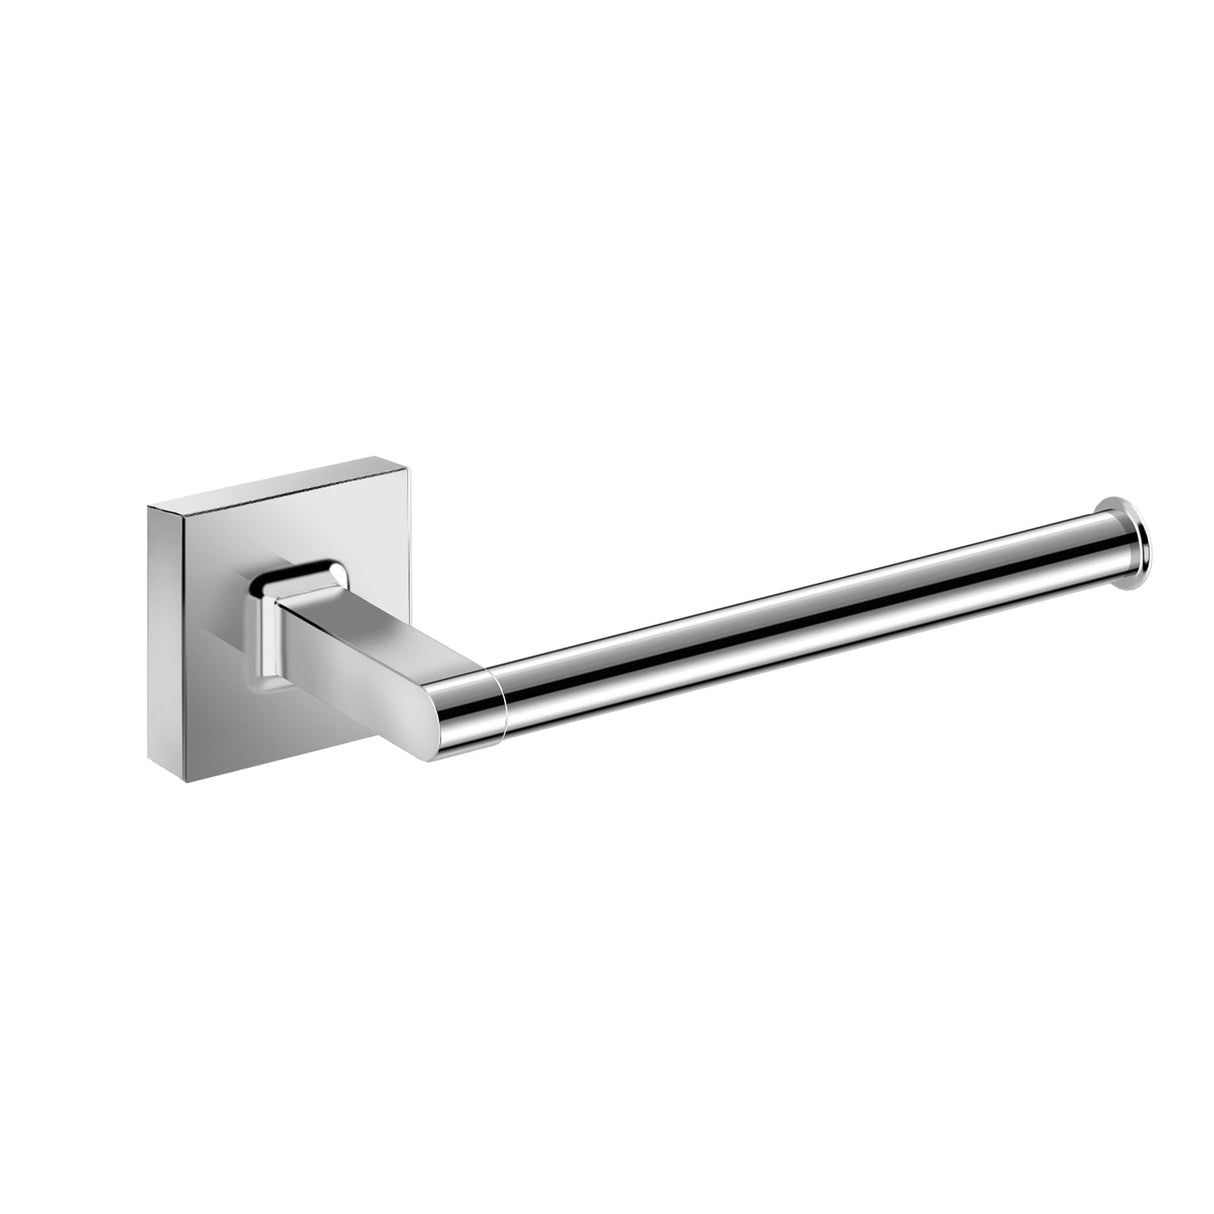 DAX Milan Brass Toilet Paper Holder Right Opening Square Line, Brushed Nickel DAX-GDC160156-BN